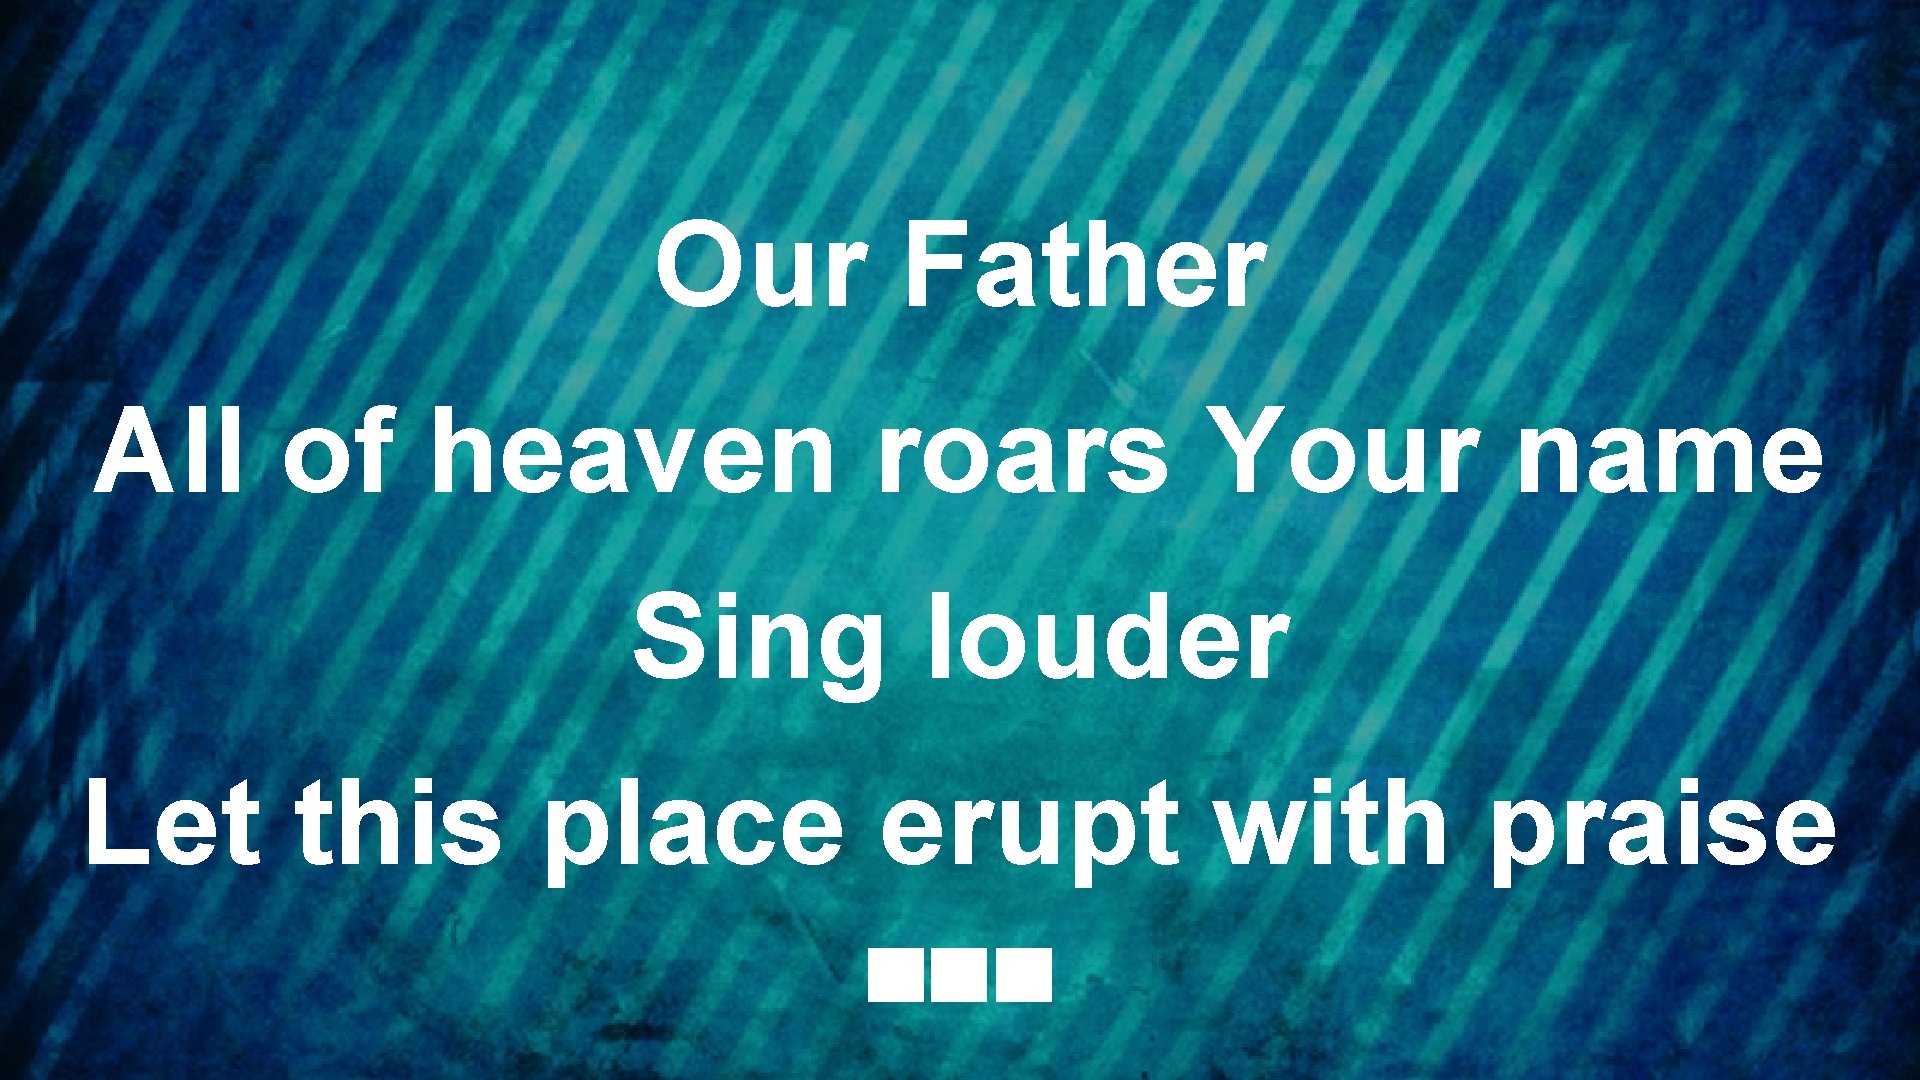 Our Father All of heaven roars Your name Sing louder Let this place erupt